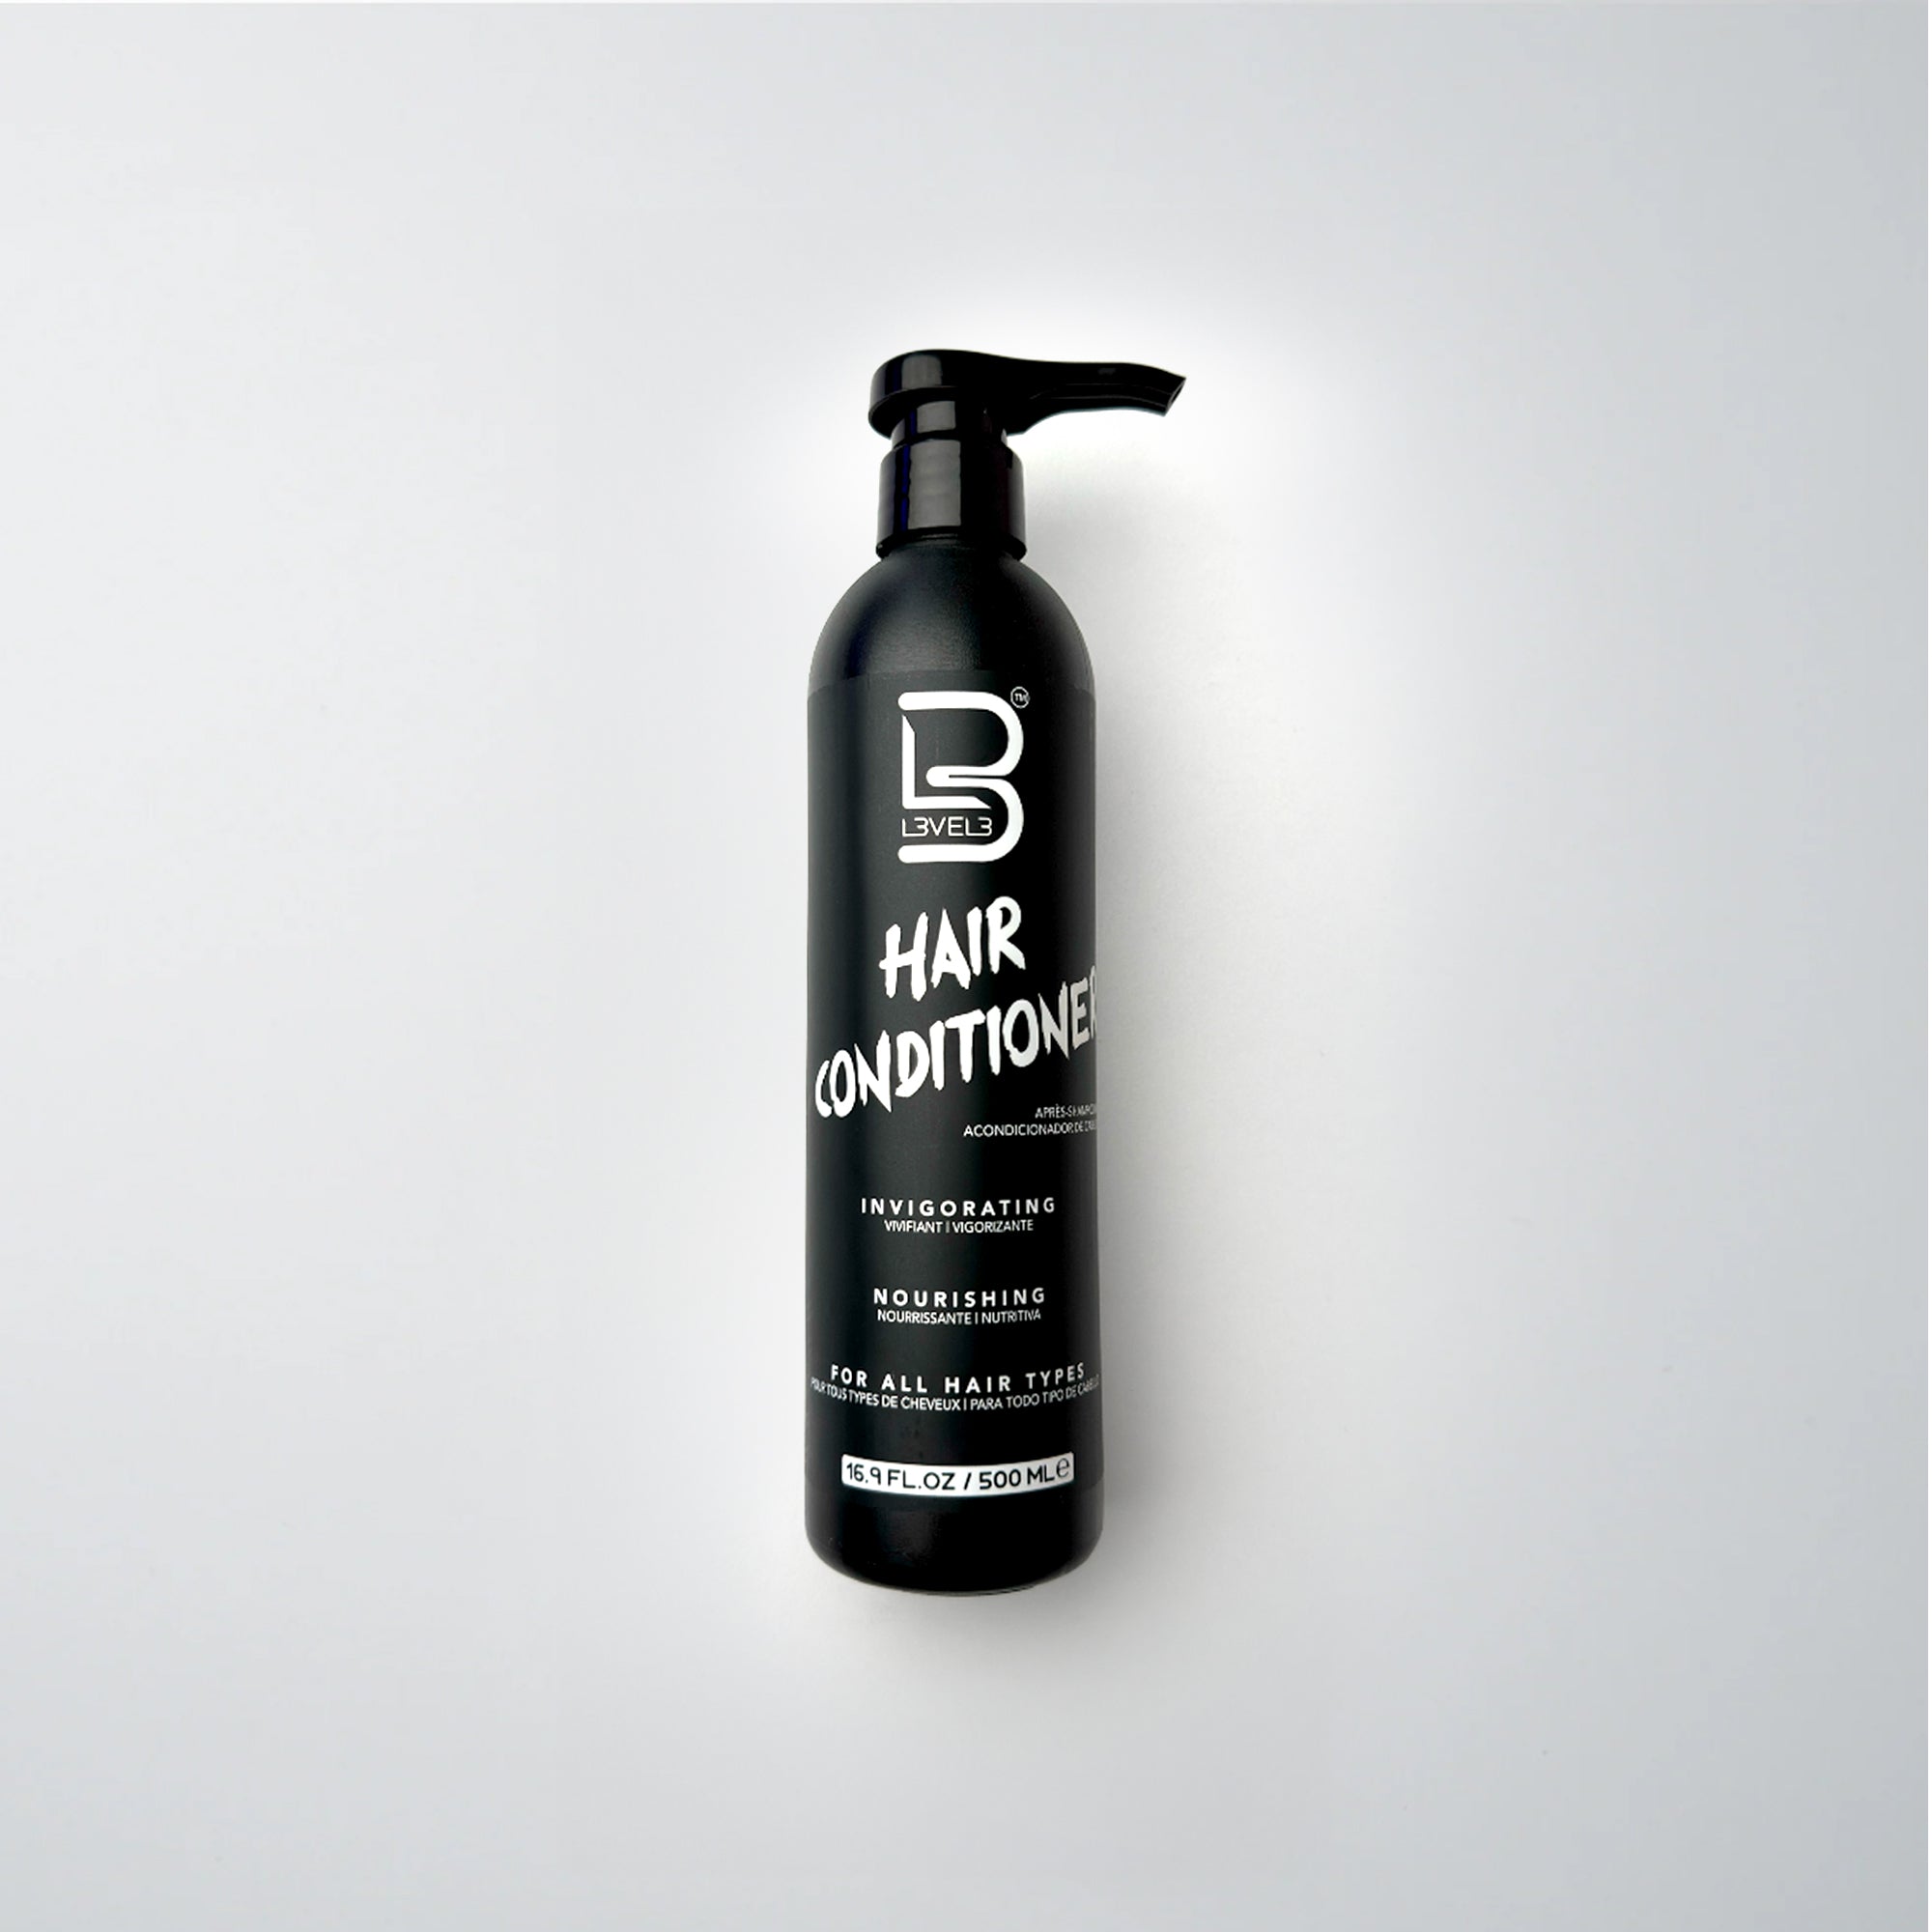 Hair & Beard | L3VEL3™ - Hair Styling Products, Skincare & More